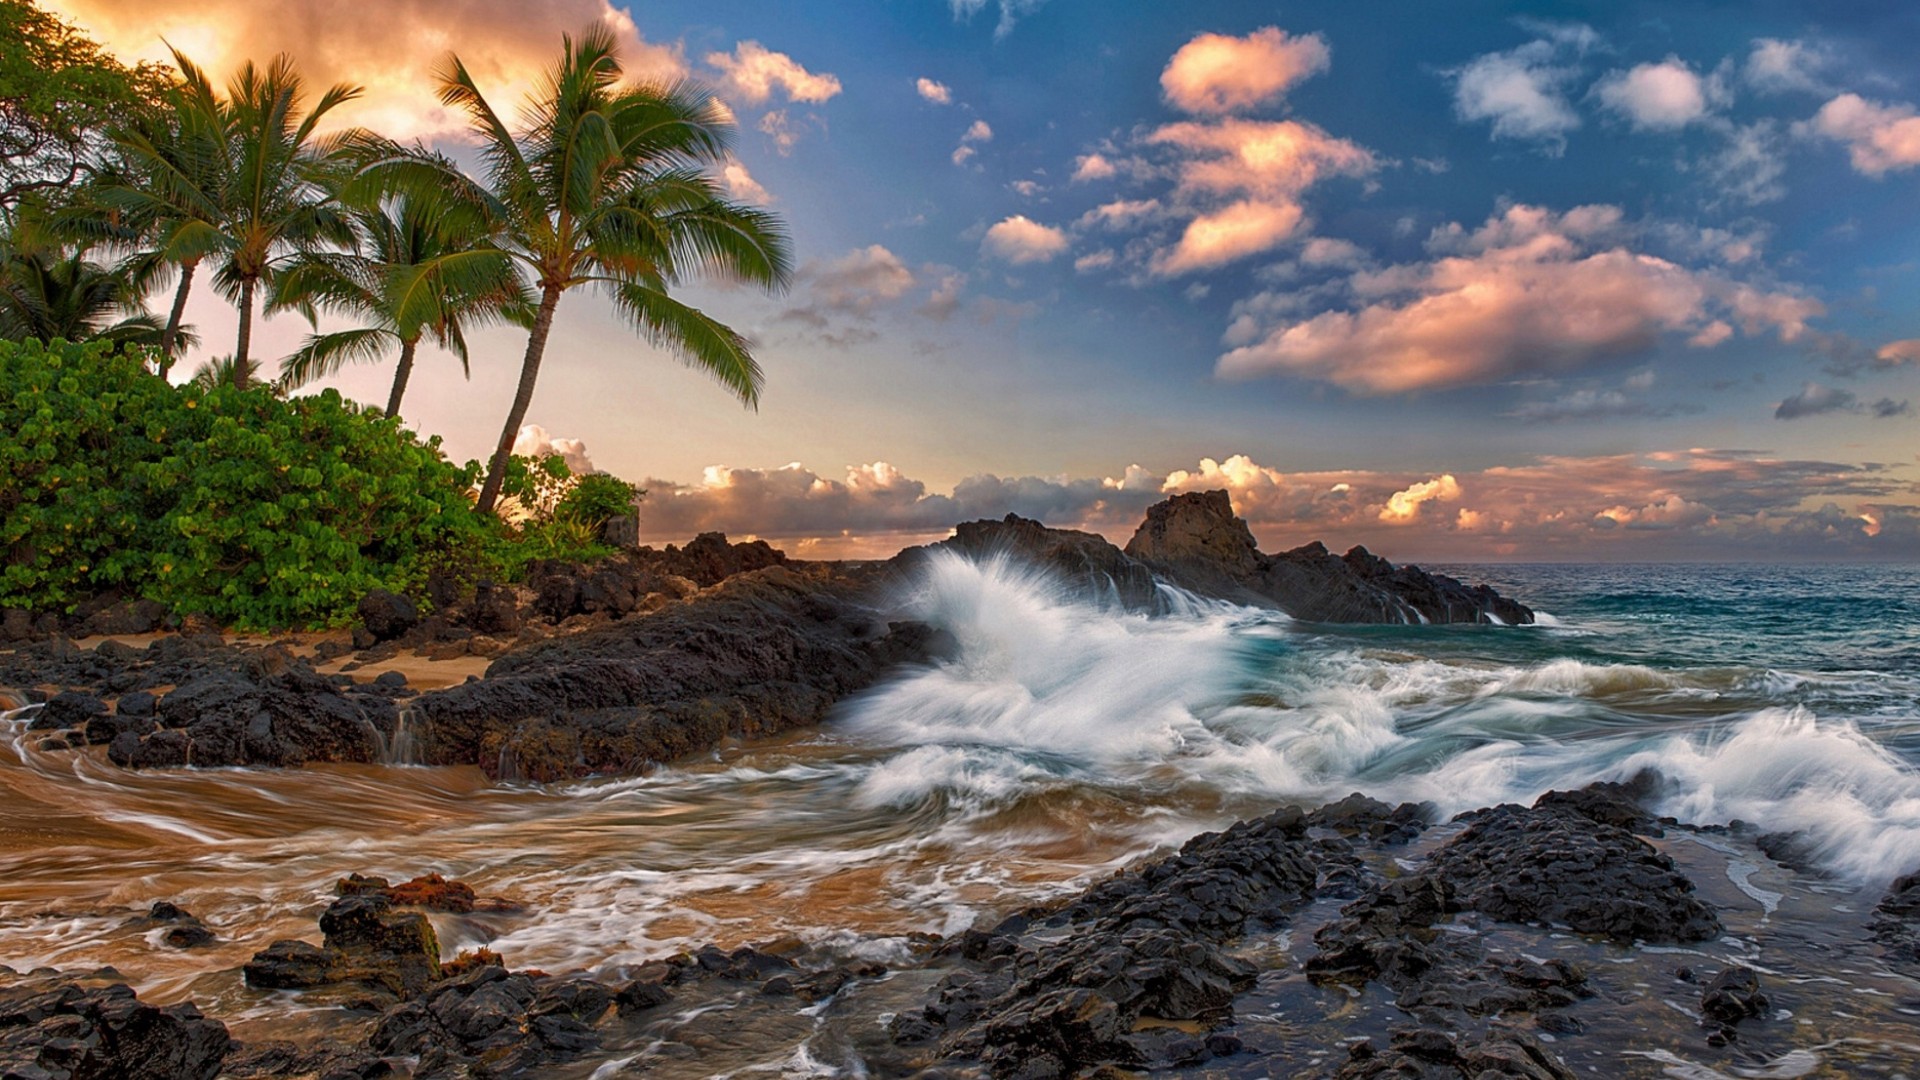 Free download Wallpaper Search more high Definition 1080p 720p Free HD  wallpaper [1920x1080] for your Desktop, Mobile & Tablet | Explore 47+ Free  Wallpaper Pictures of Hawaii | Hawaii Wallpaper Free, Hawaii